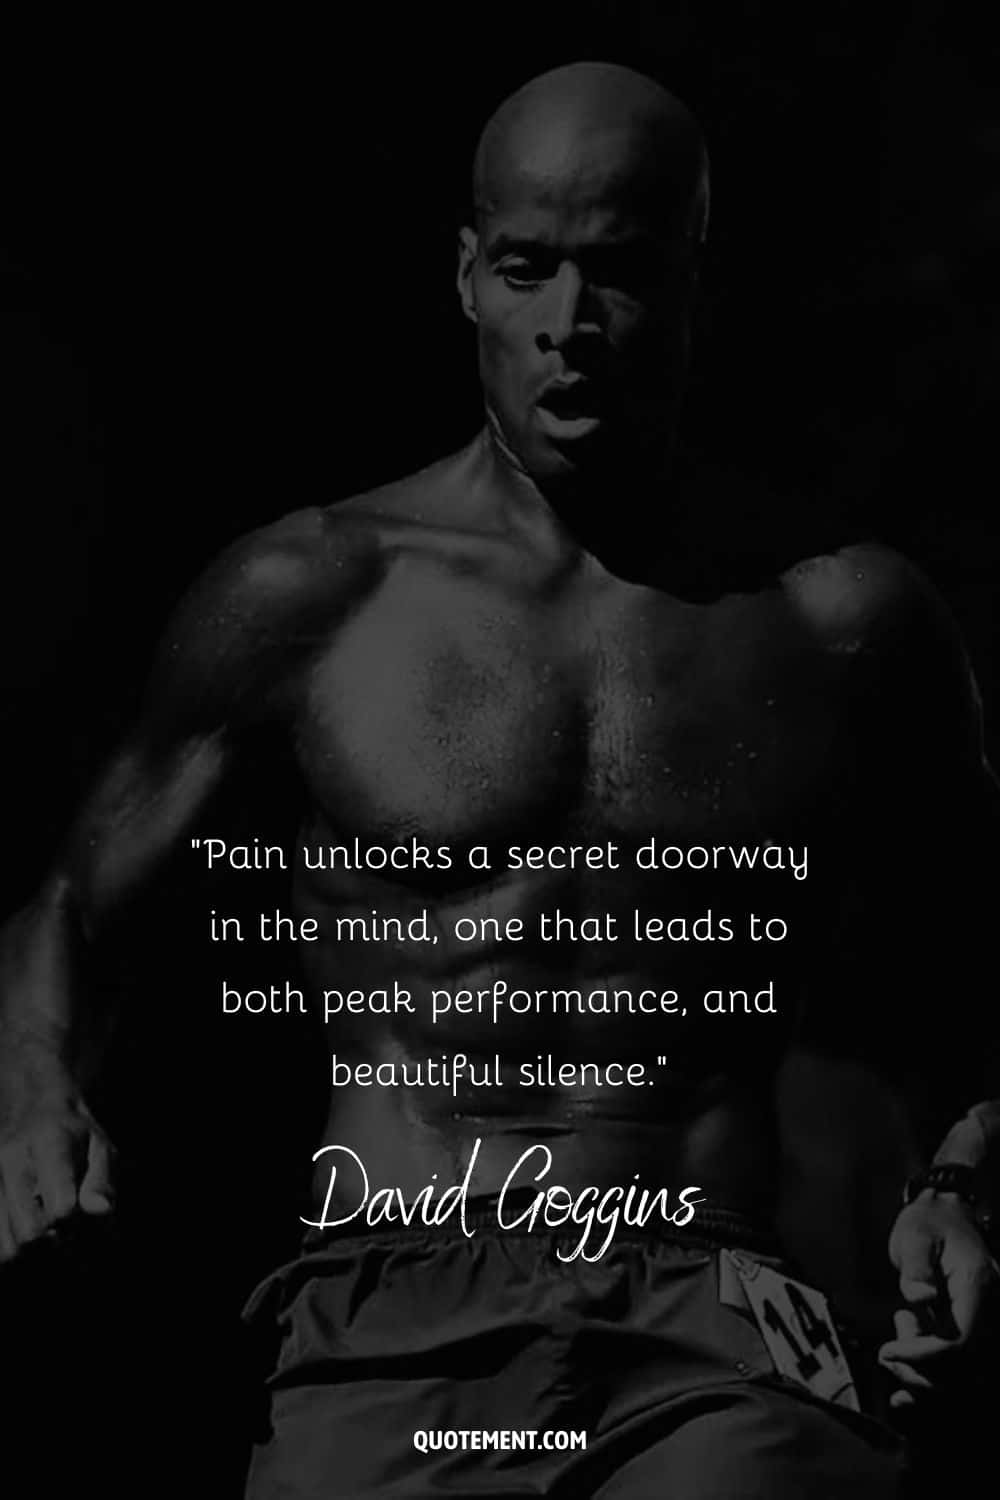 Quote on pain by David Goggins and his photo in the background